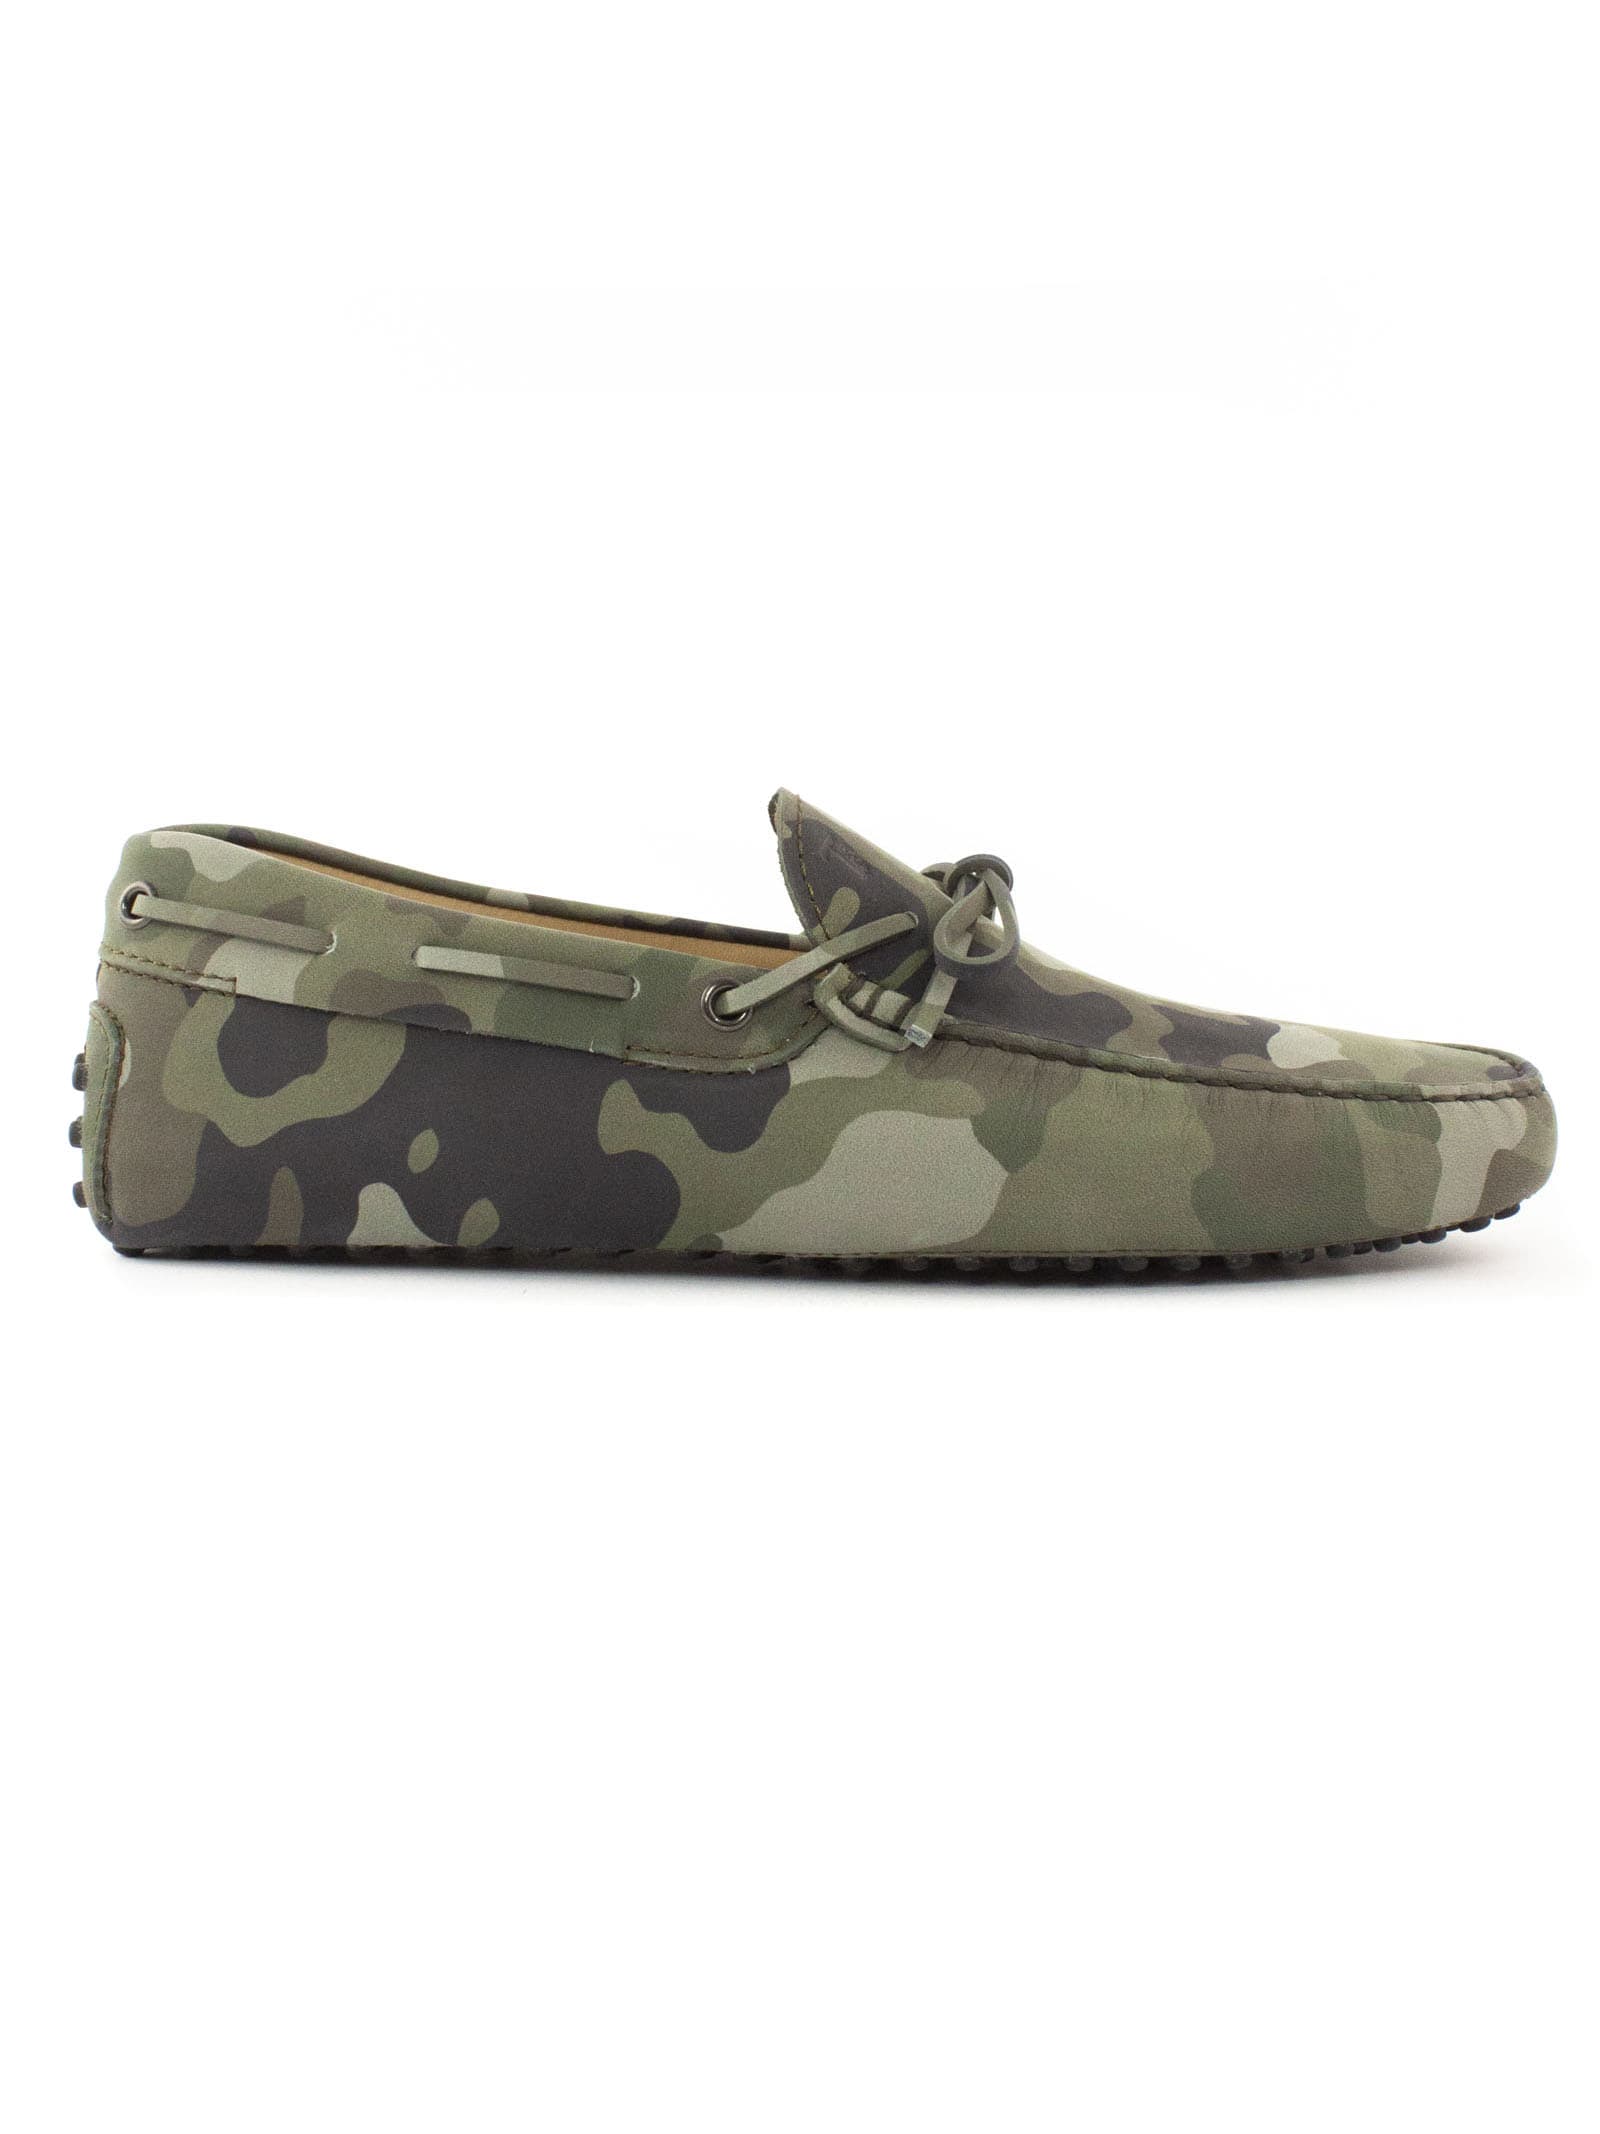 Tods Camouflage Gommino Driving Shoes